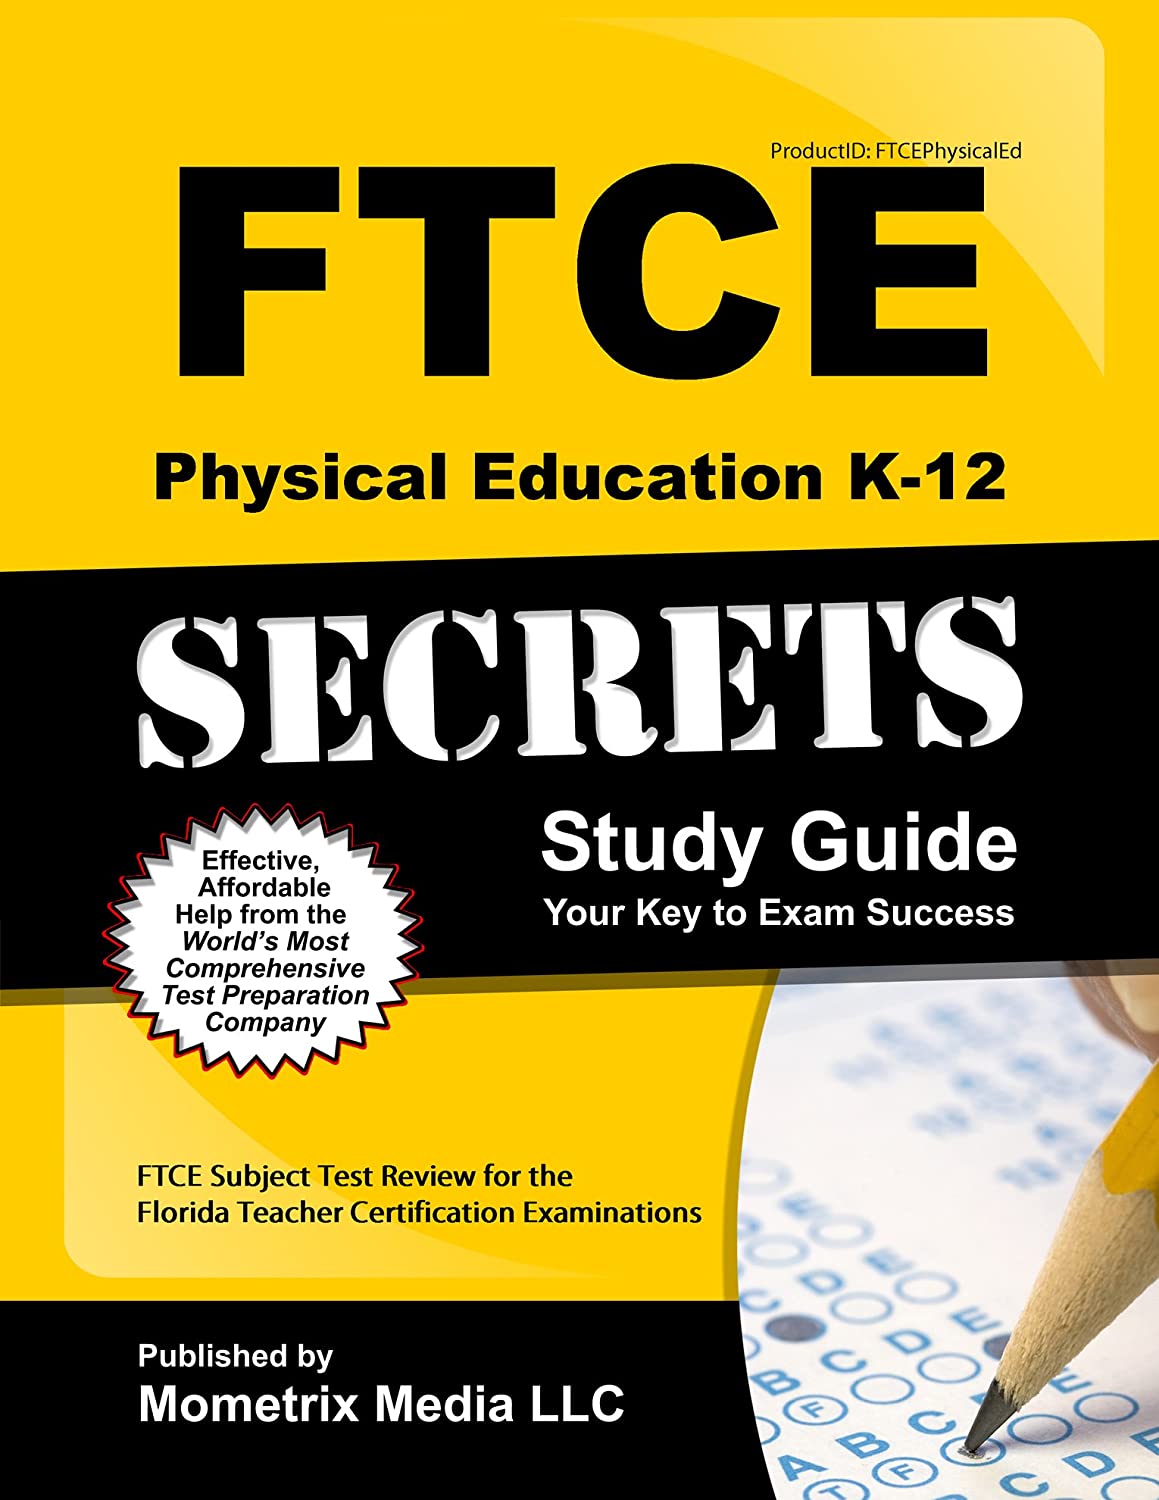 FTCE Physical Education K-12 Secrets Study Guide: FTCE Test Review for the Florida Teacher Certification Examinations